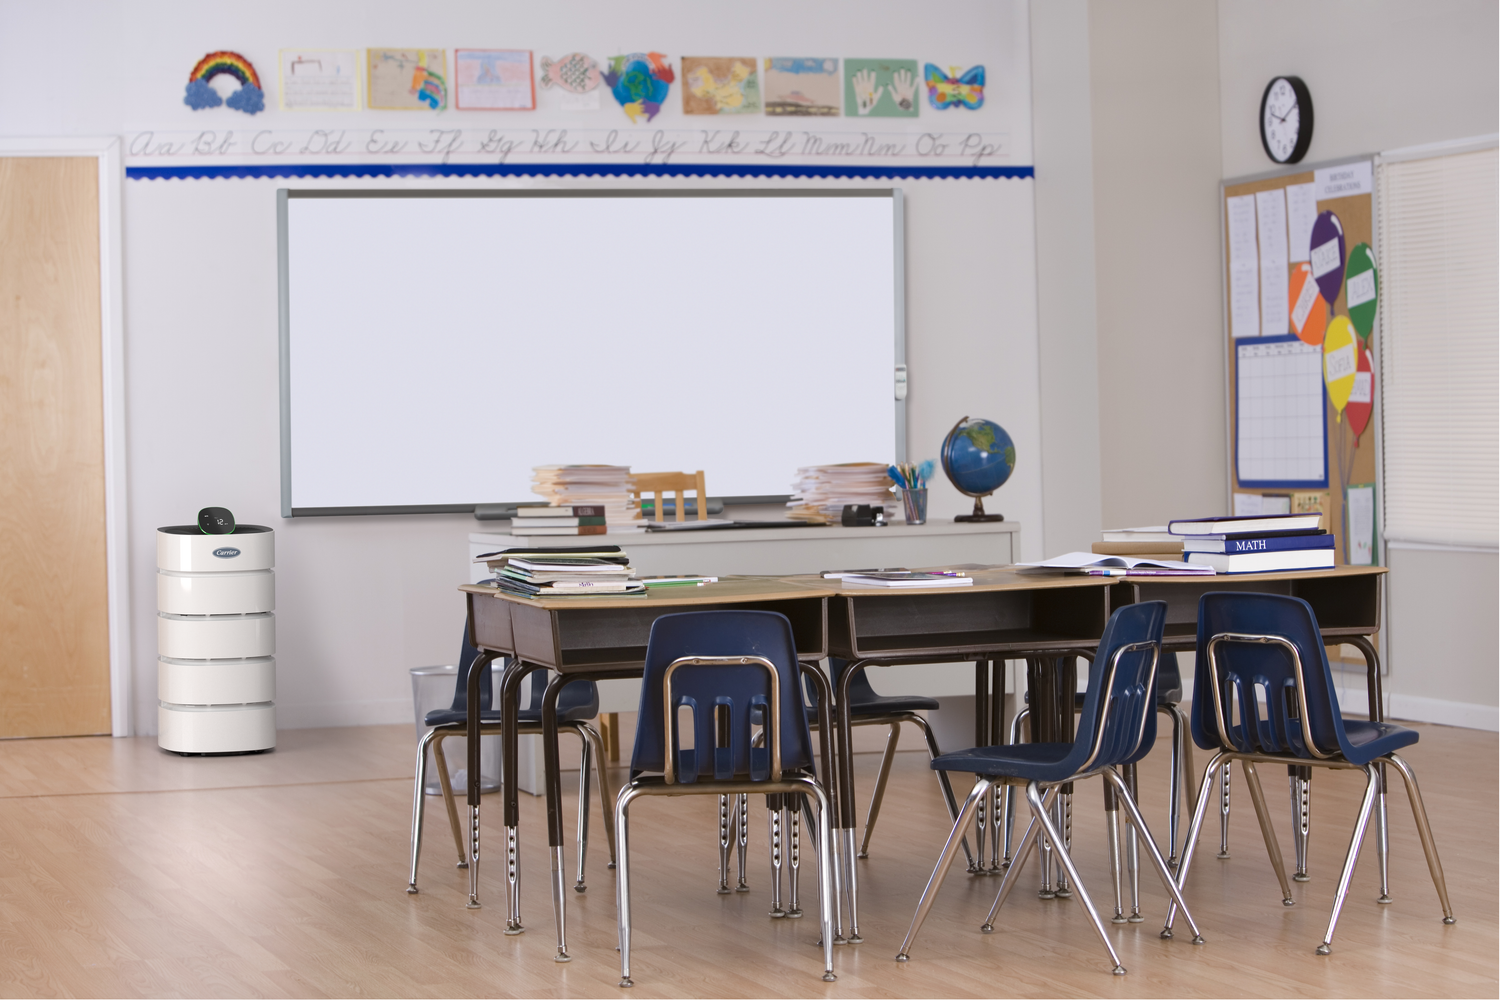 Classroom with a Carrier Air Purifier